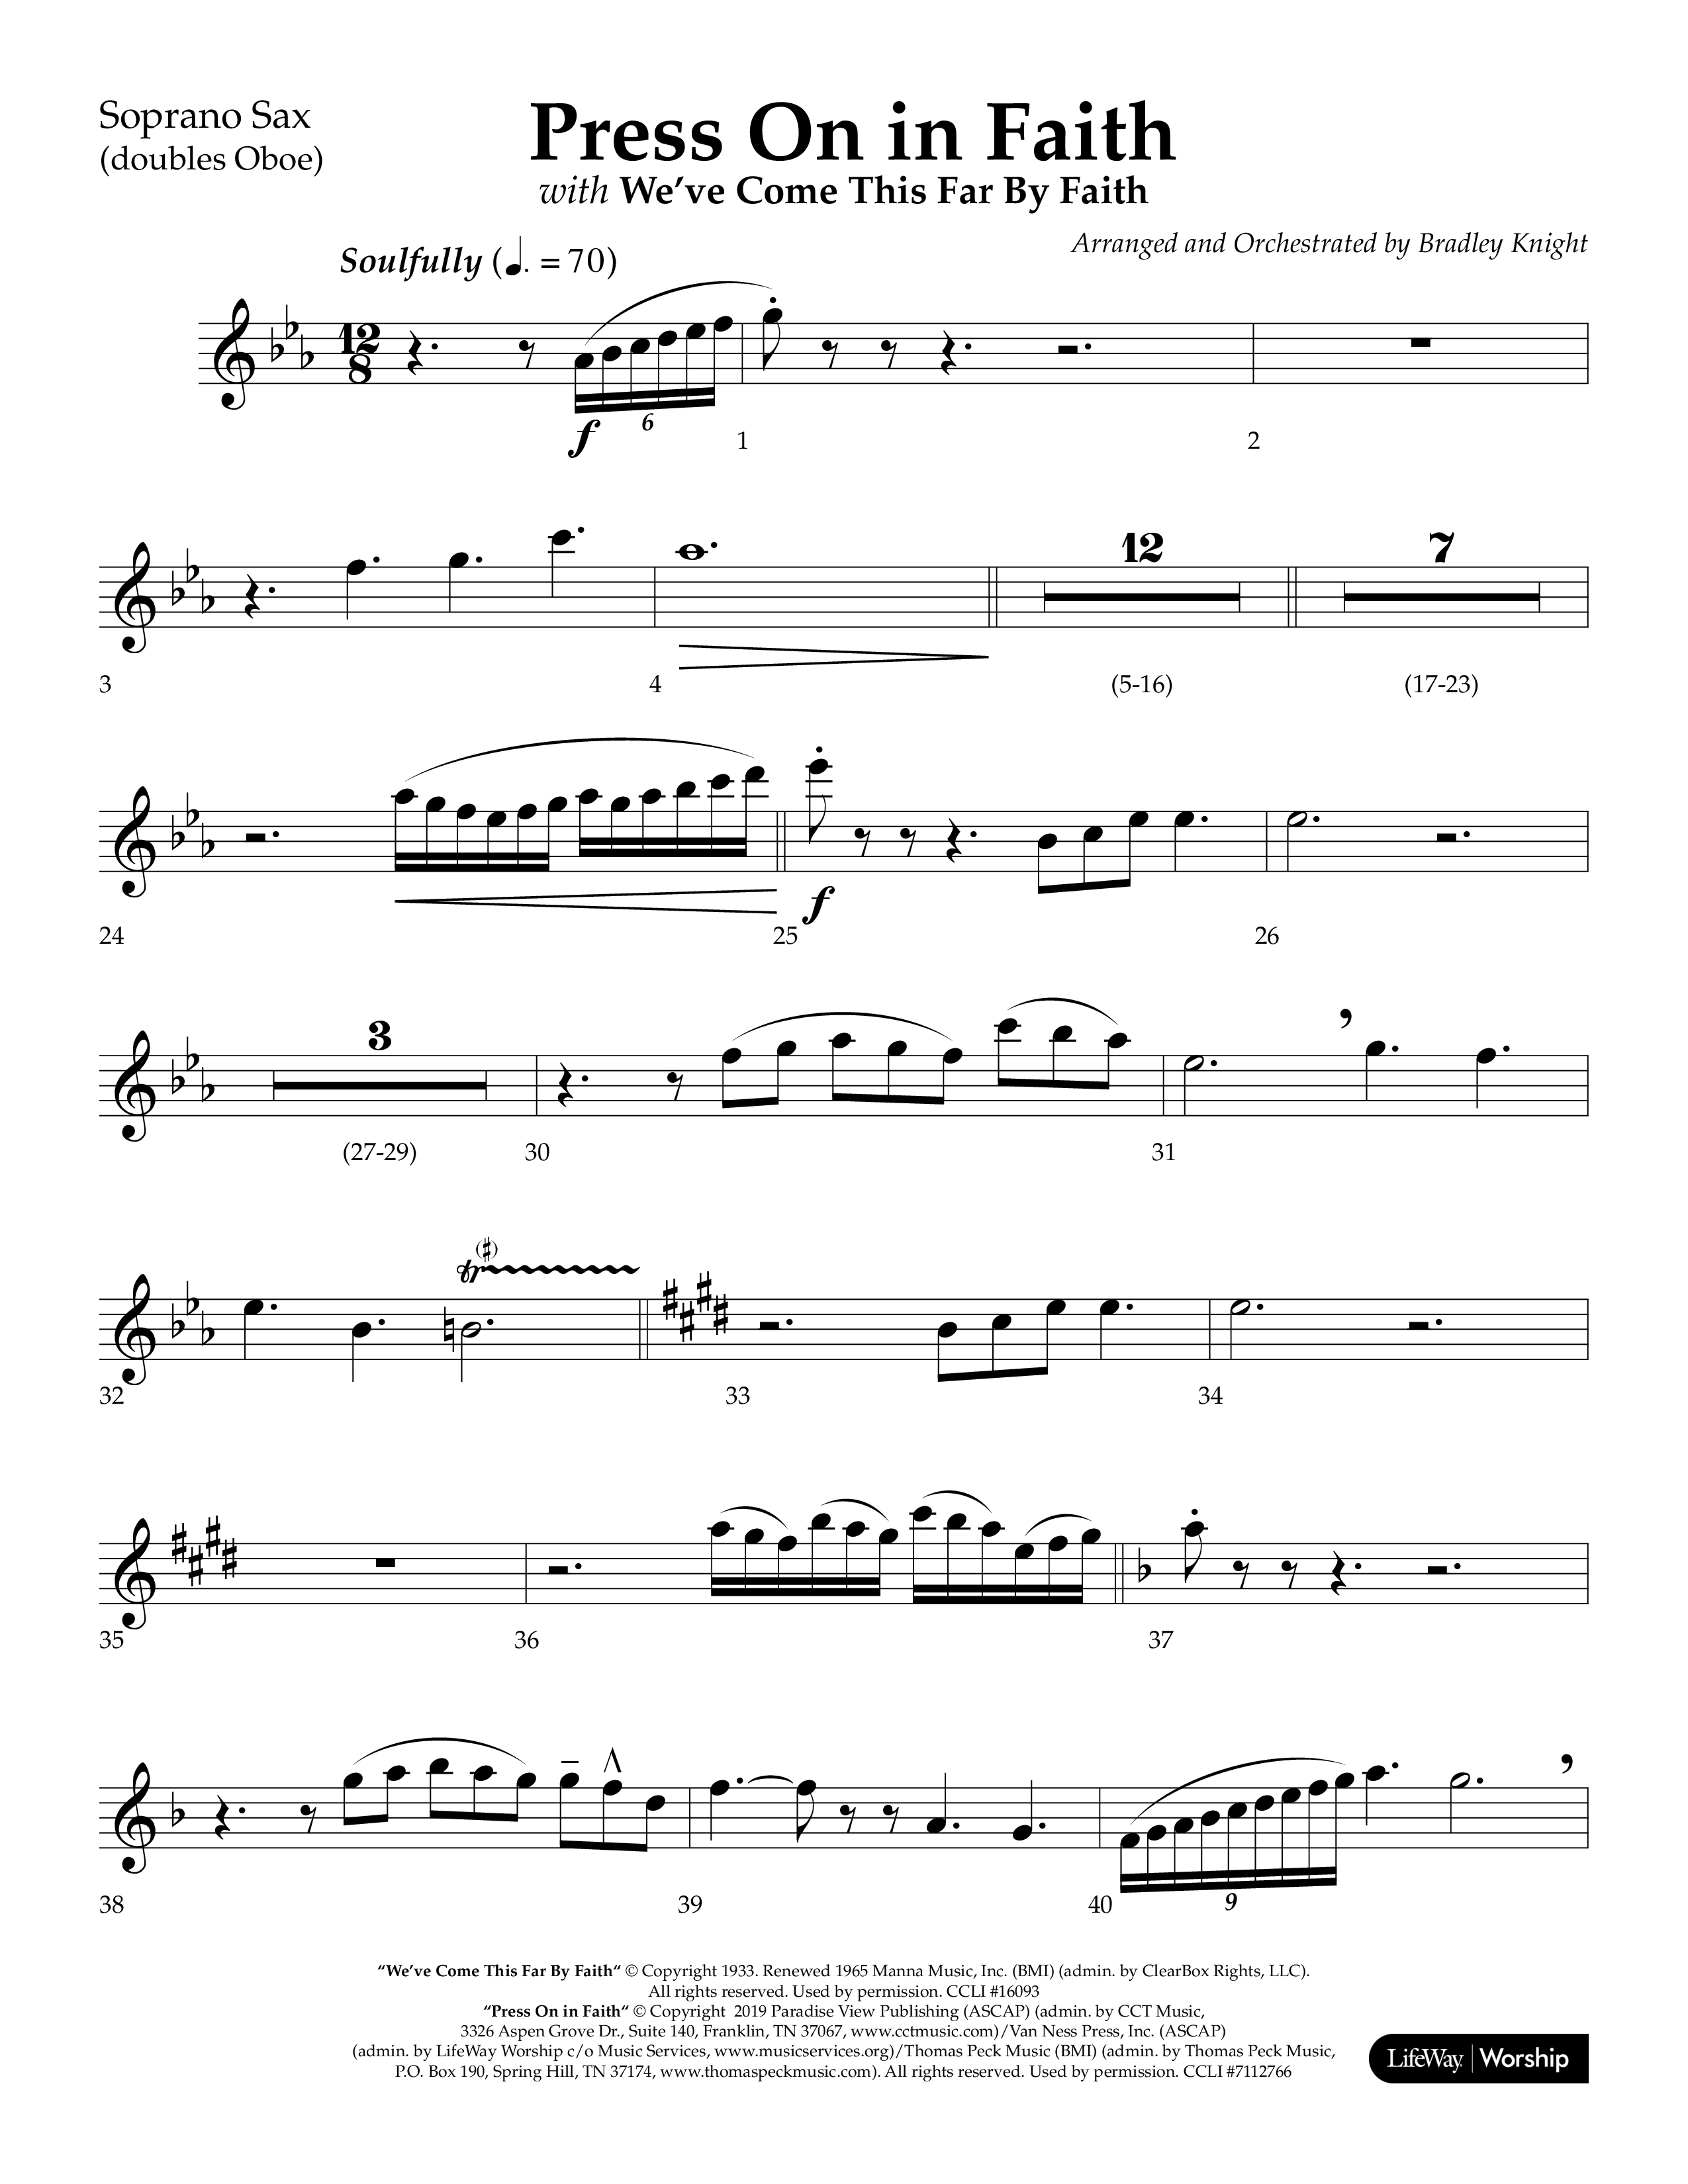 Press On In Faith with We’ve Come This Far By Faith Choral Anthem SATB Soprano Sax (Lifeway Choral / Orch. Bradley Knight)